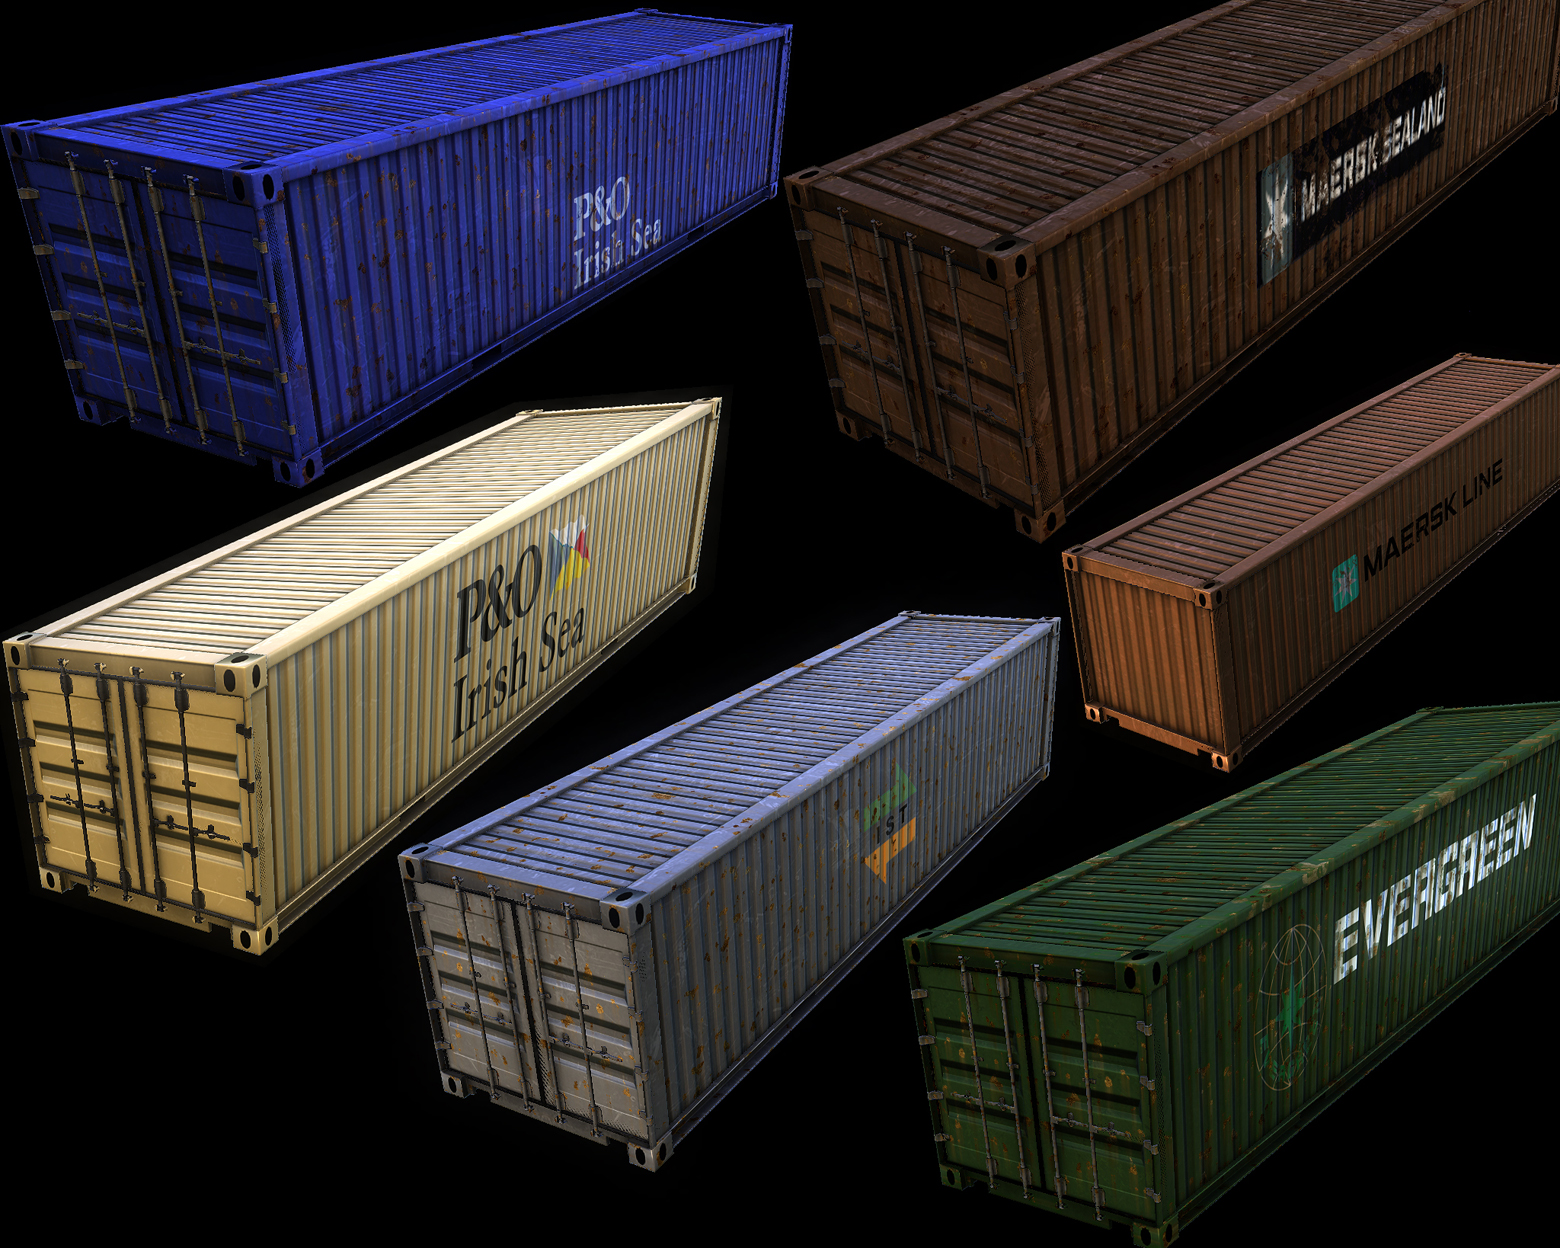 Shipping containers image - BuLL5H1T - Indie DB